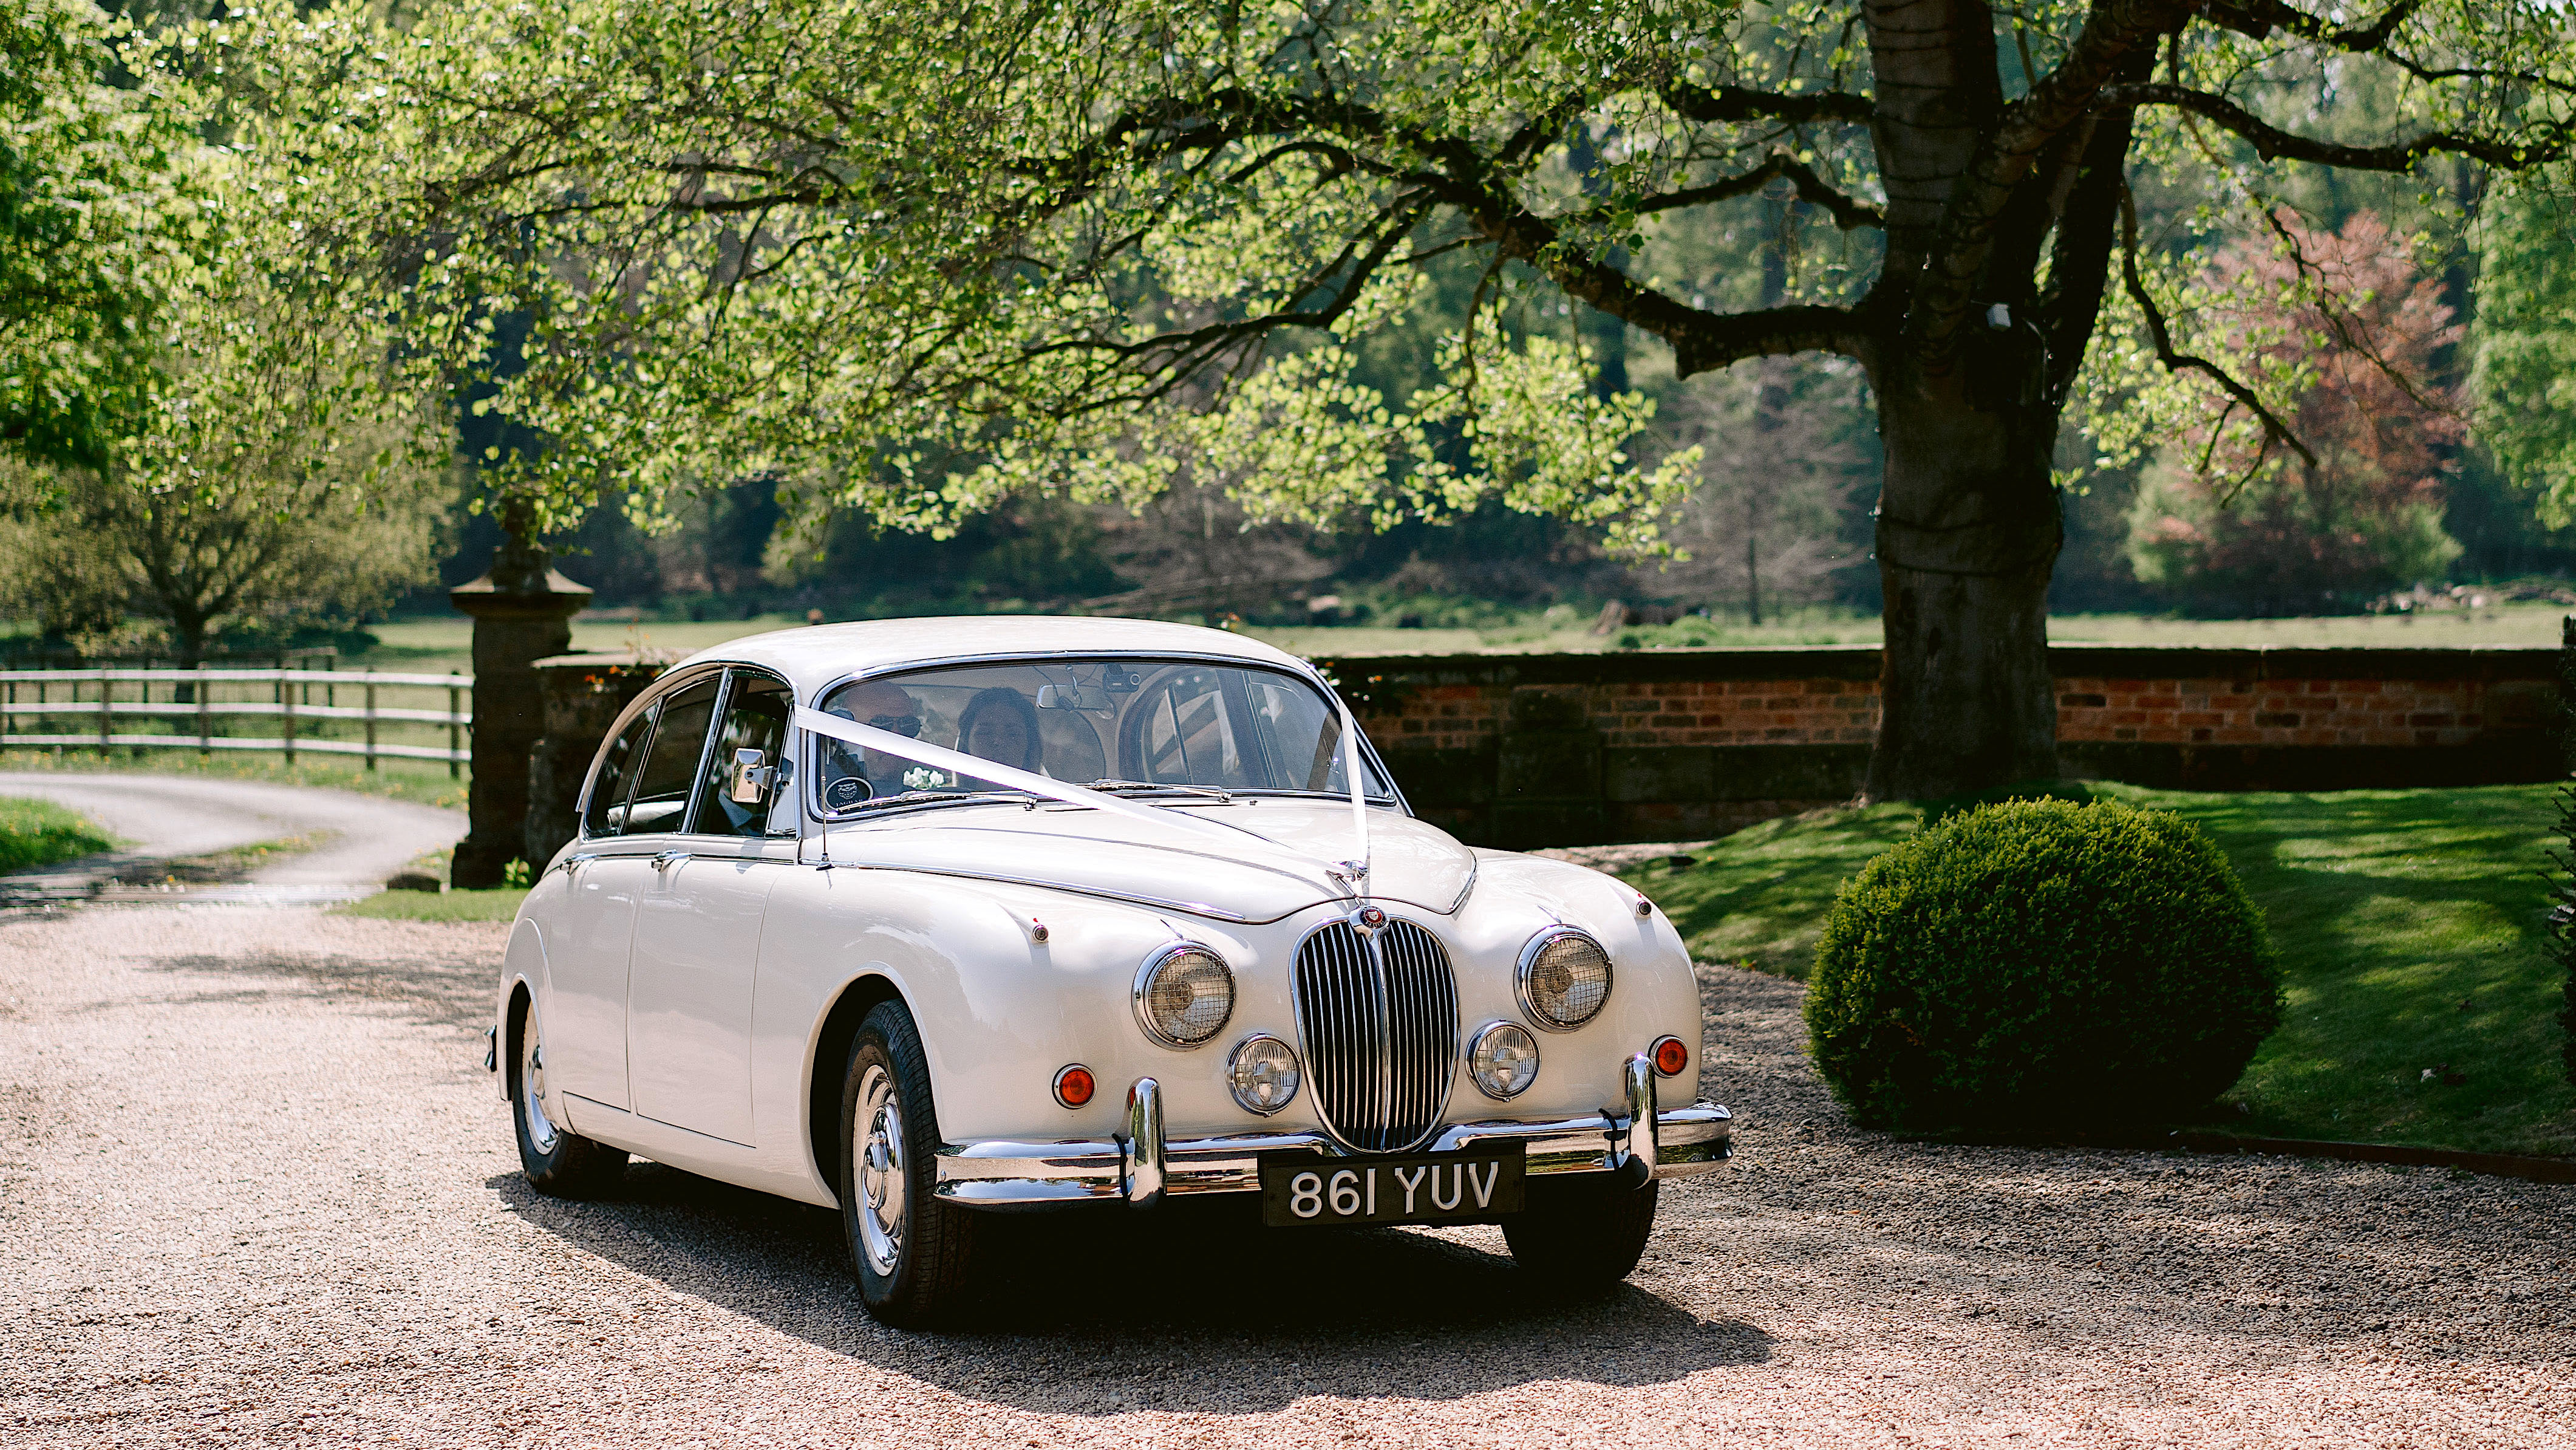 Classic Jaguar entering the Meols Hall in Southport